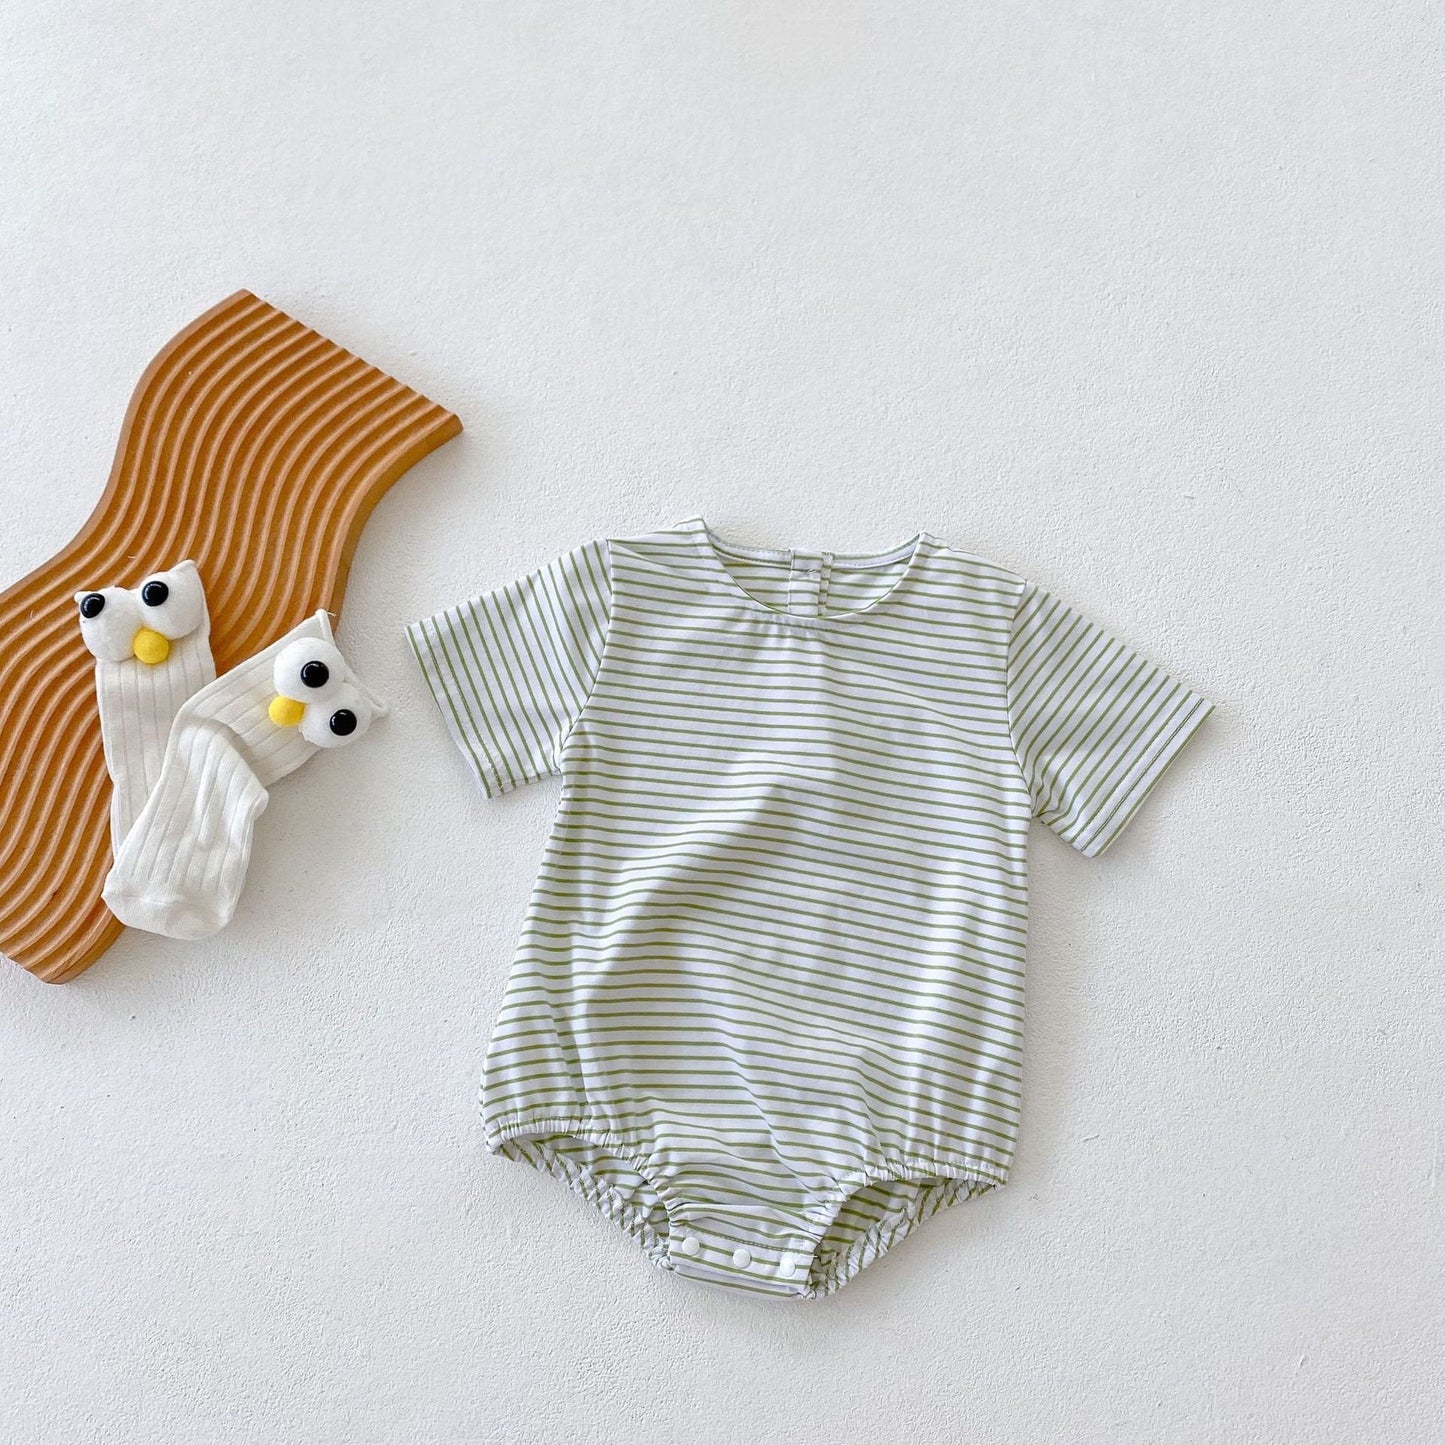 Cute oversized, bubble striped baby romper for summer/spring. Unisex, gender neutral perfect baby shower gift